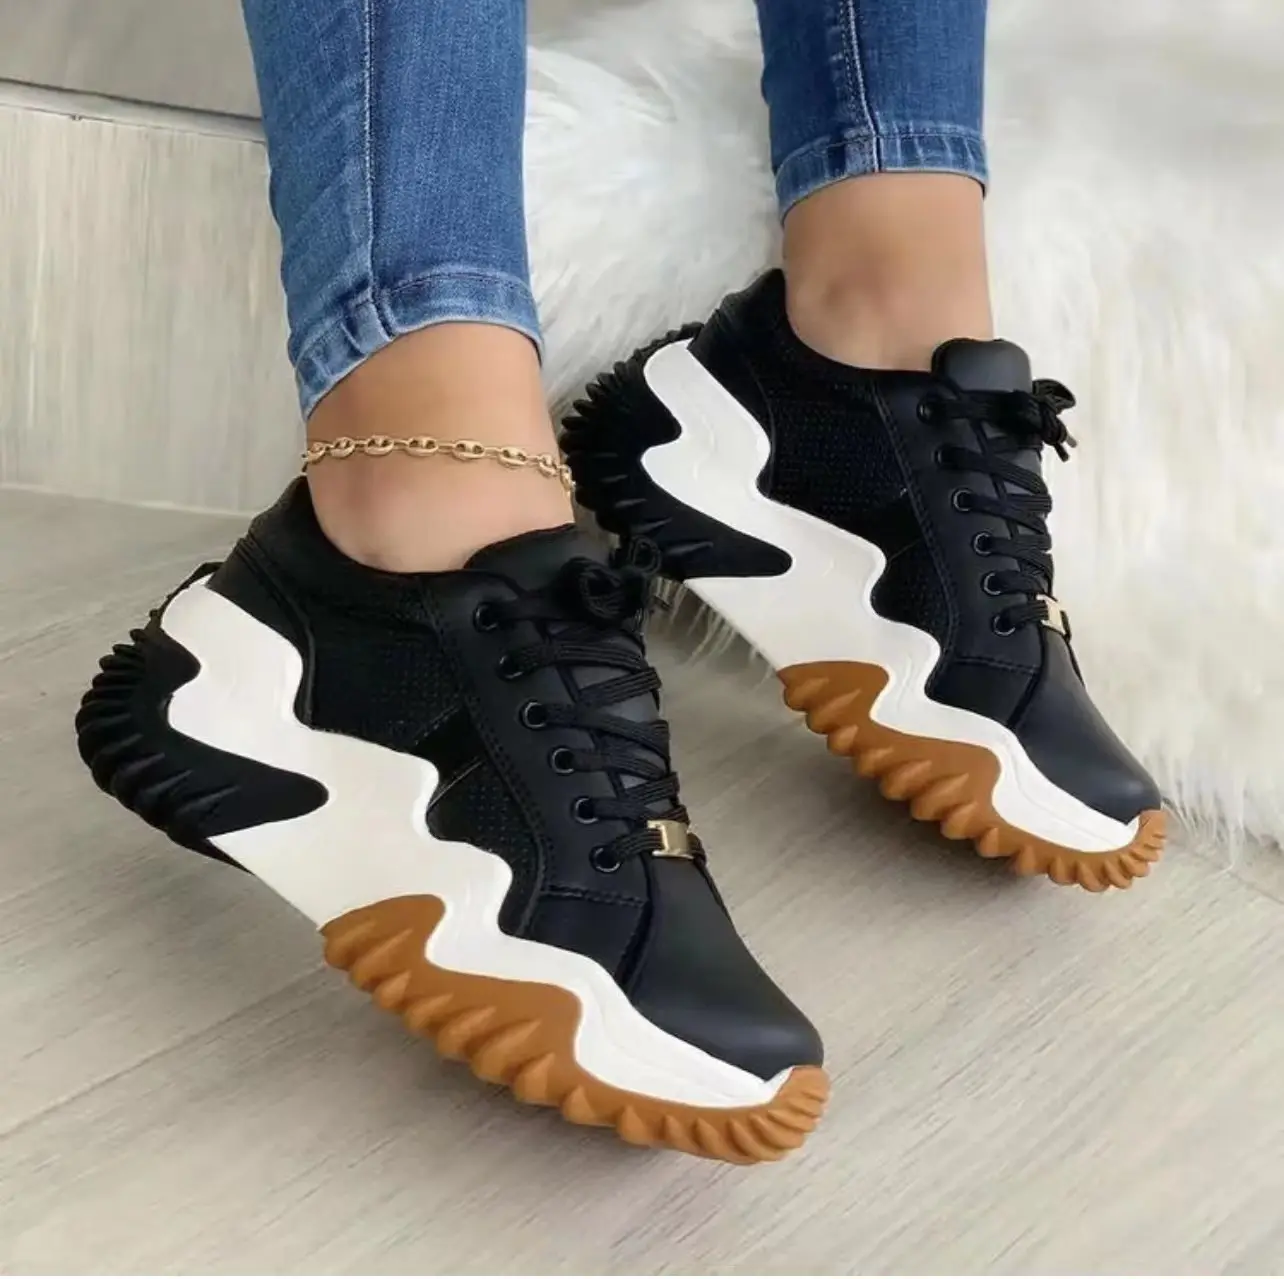 G Custom Logo Stock New luxury Brand Casual Shoes Sneakers Lightweight Comfortable Breathable Women's shoes